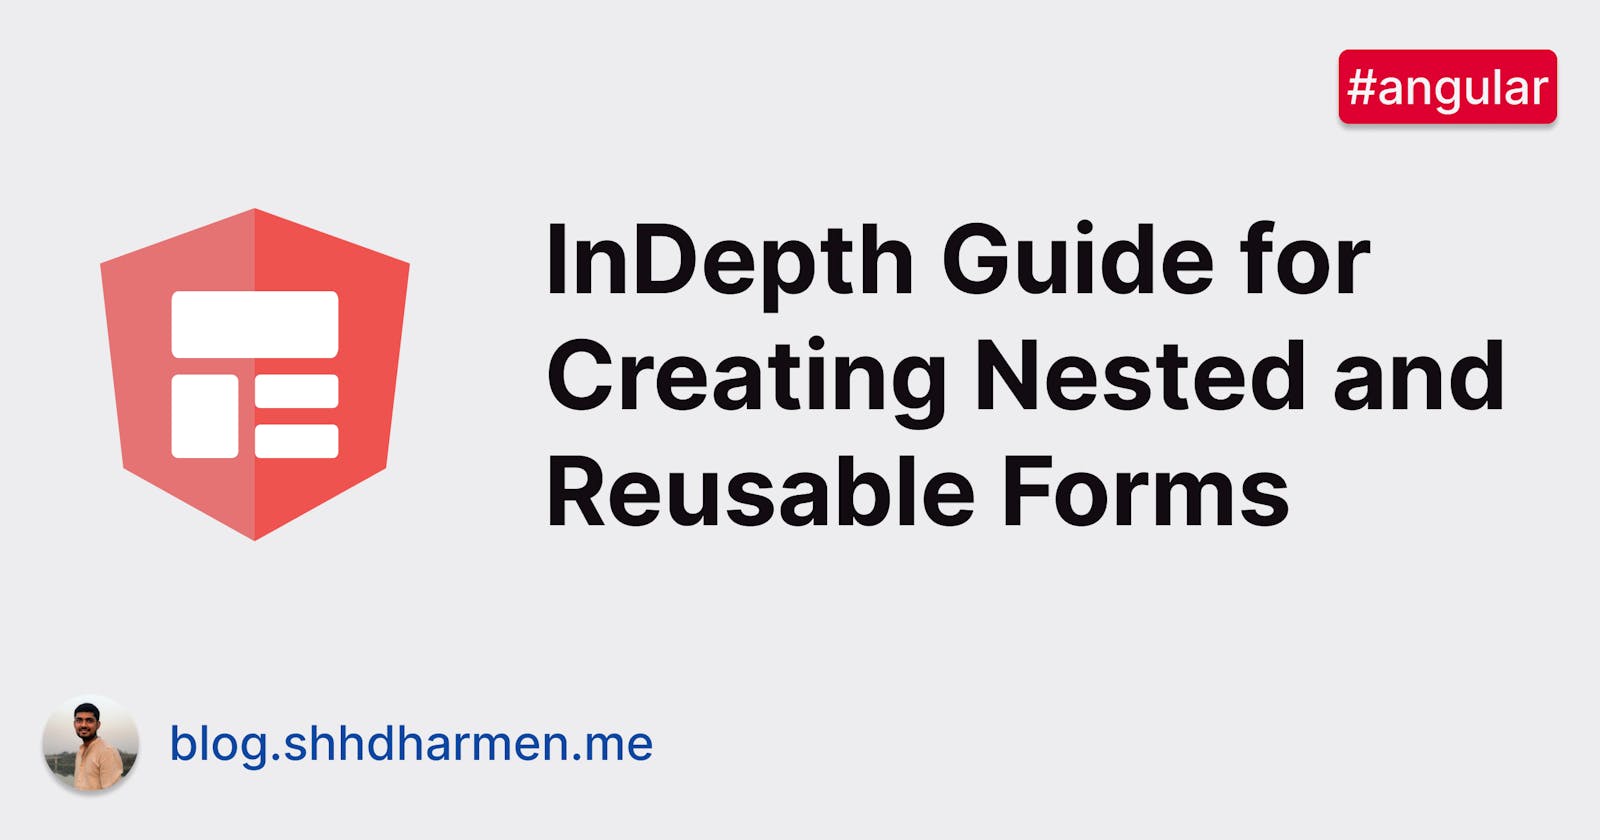 InDepth Guide for Creating Nested and Reusable Forms